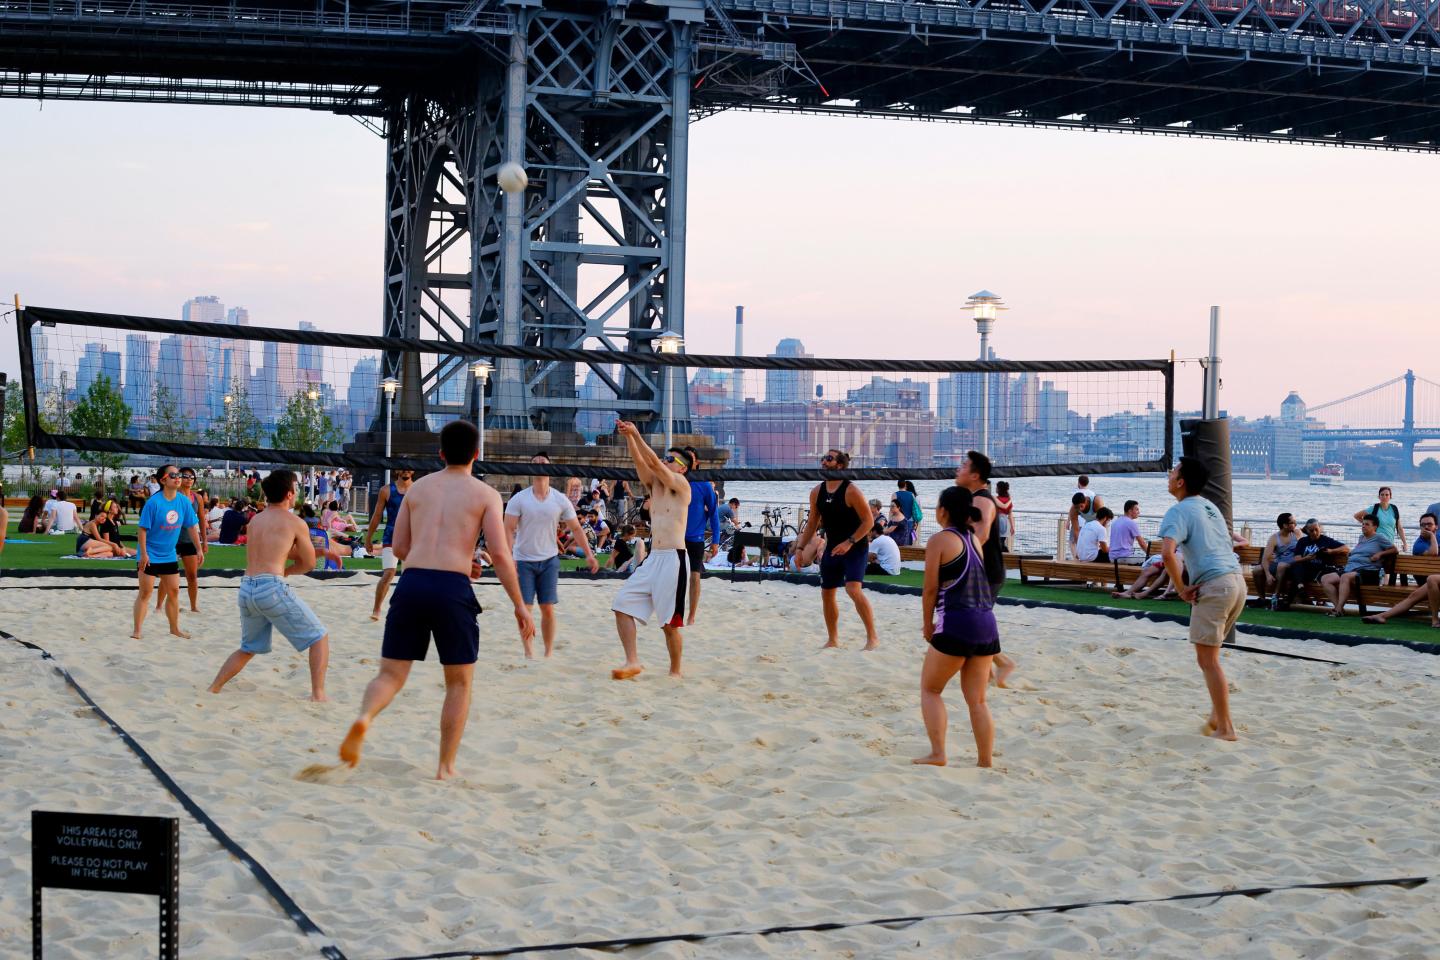 A group of people playing sand volleyball in New York City